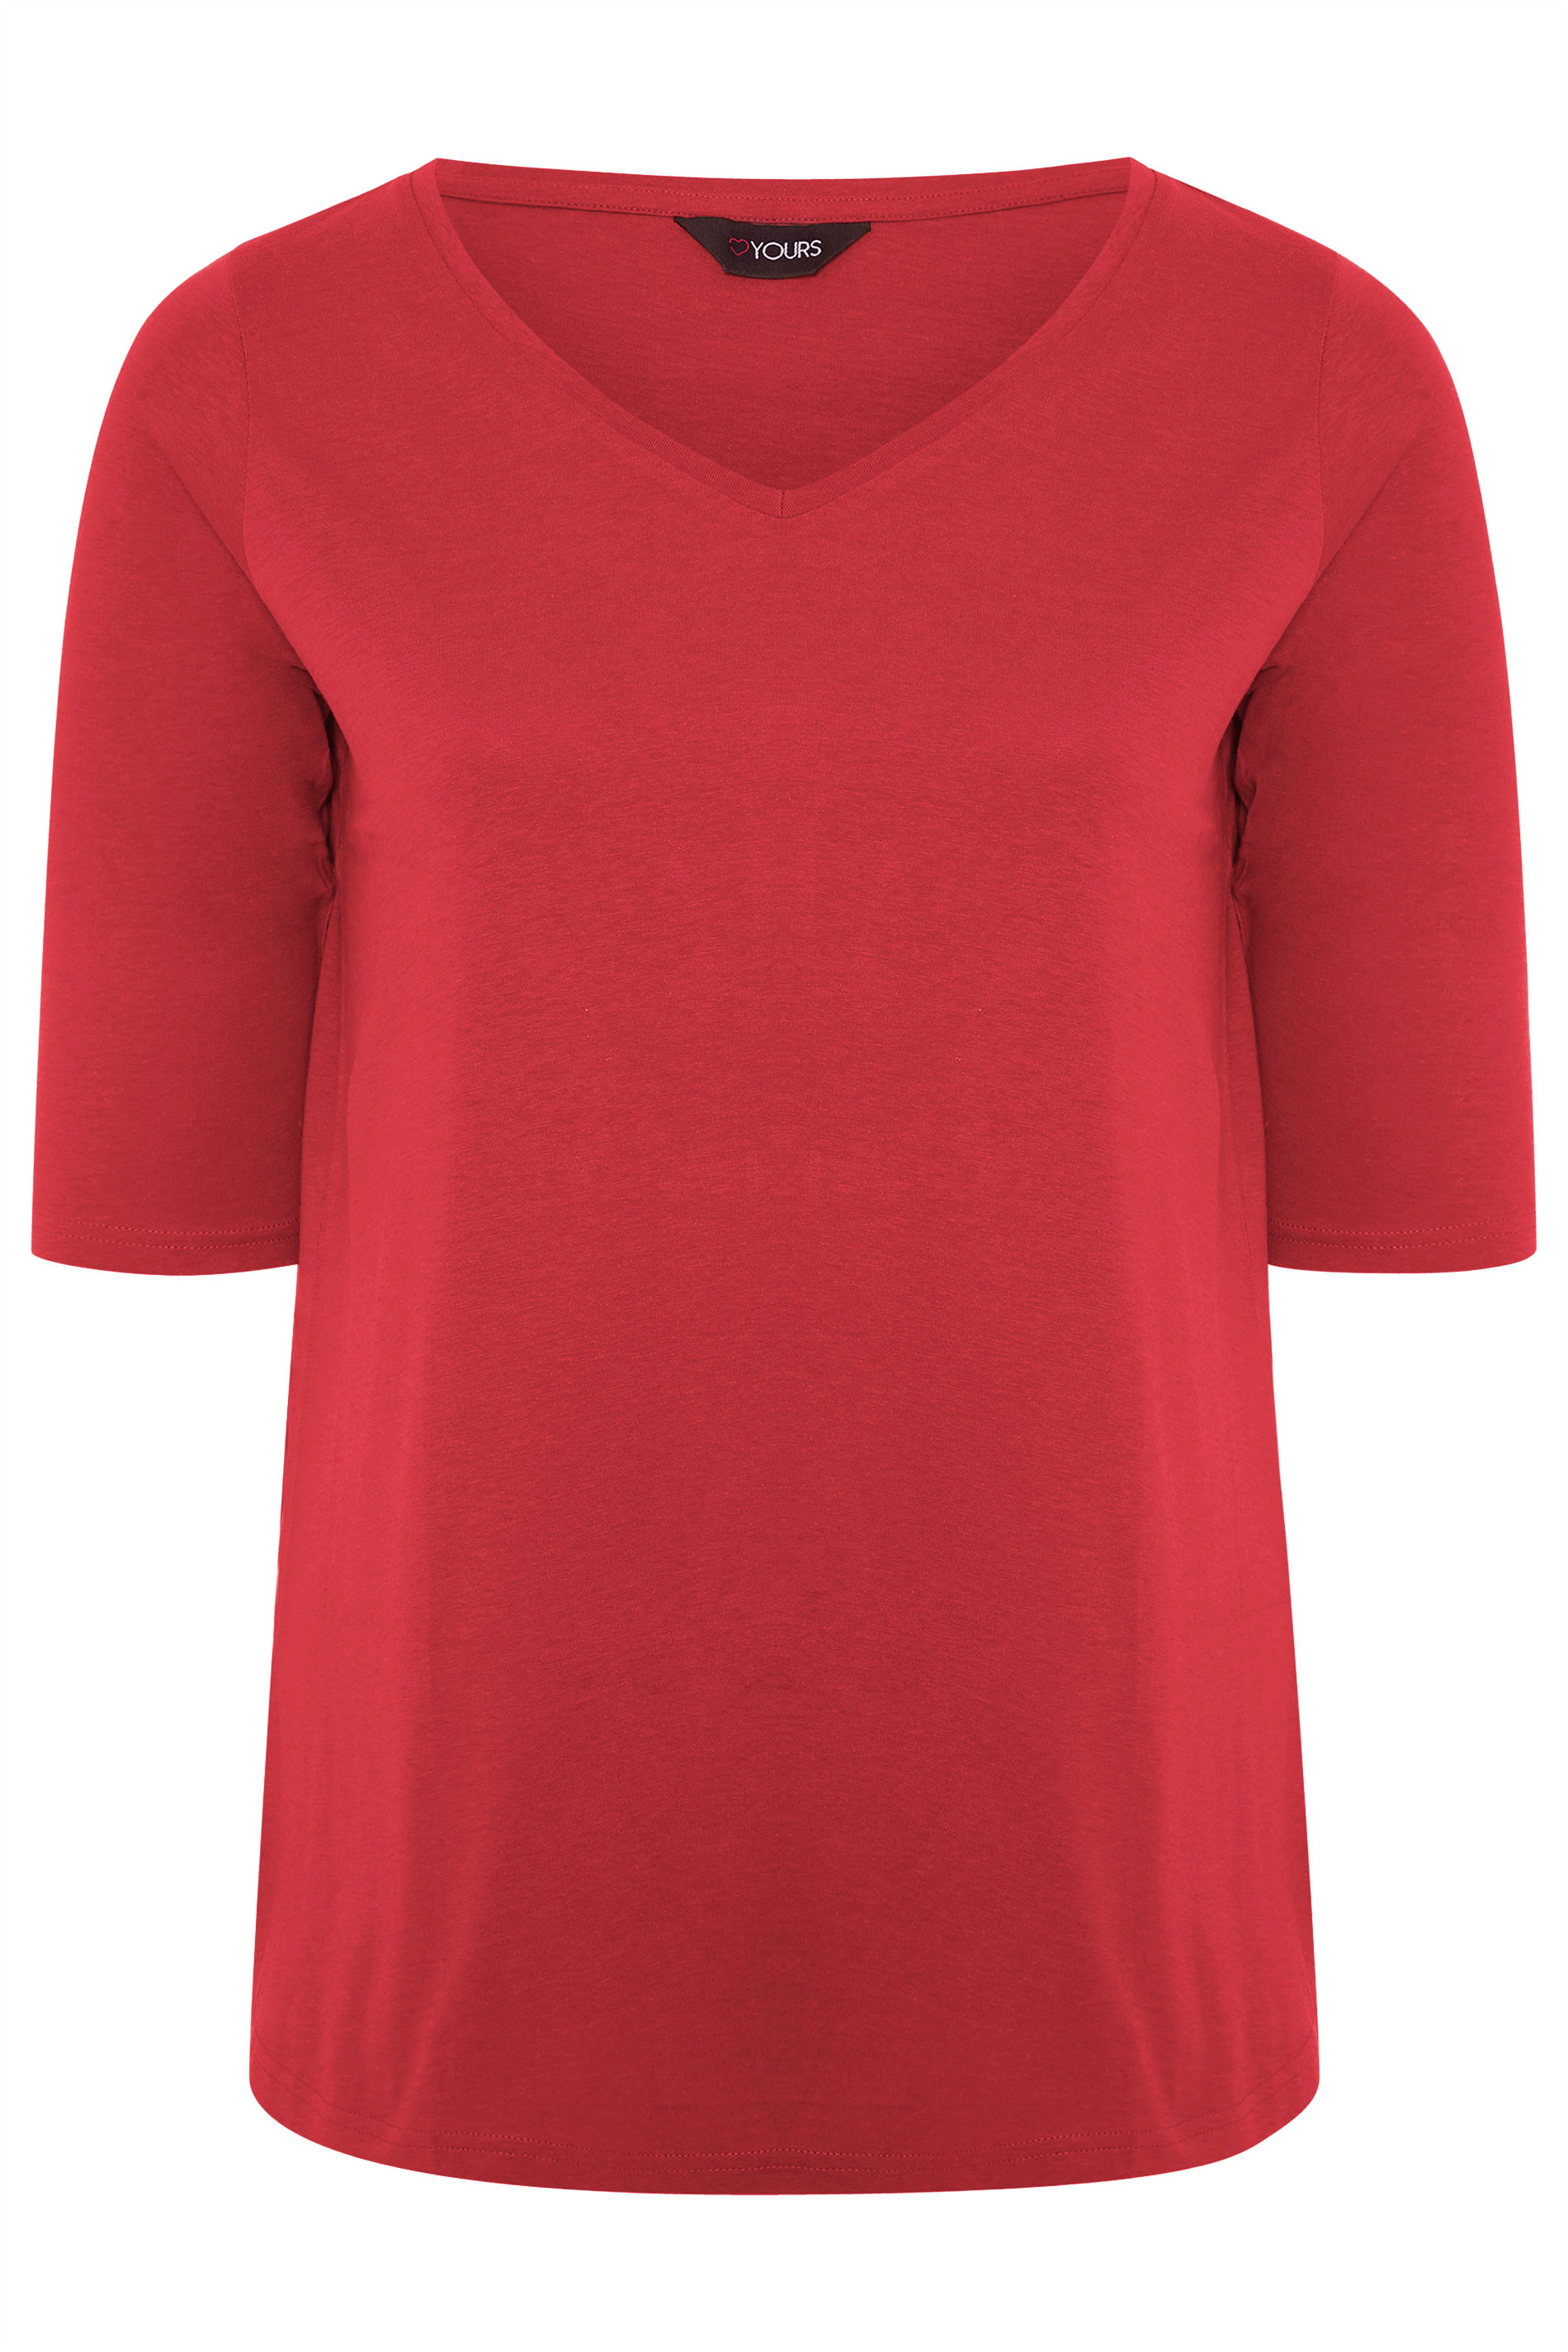 Red V-Neck Cotton Top | Yours Clothing